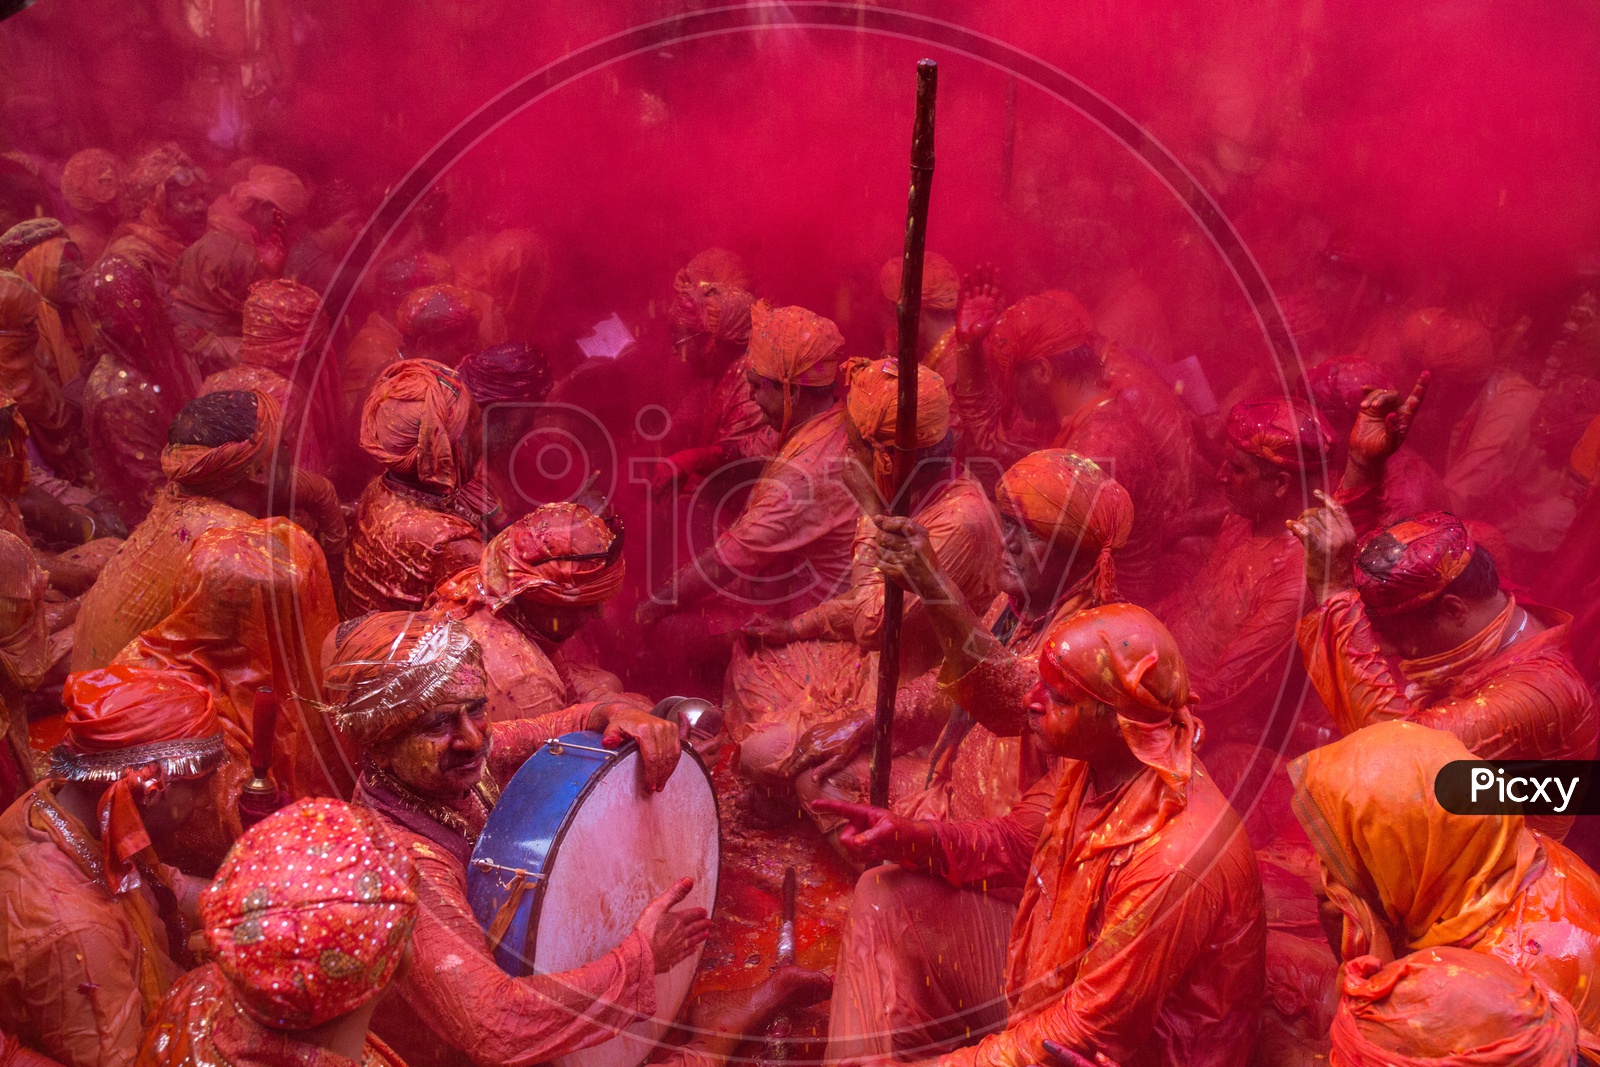 Local People Filled in Colors With Color Splash on Them In Lathmar Holi Celebrations  in Barsana